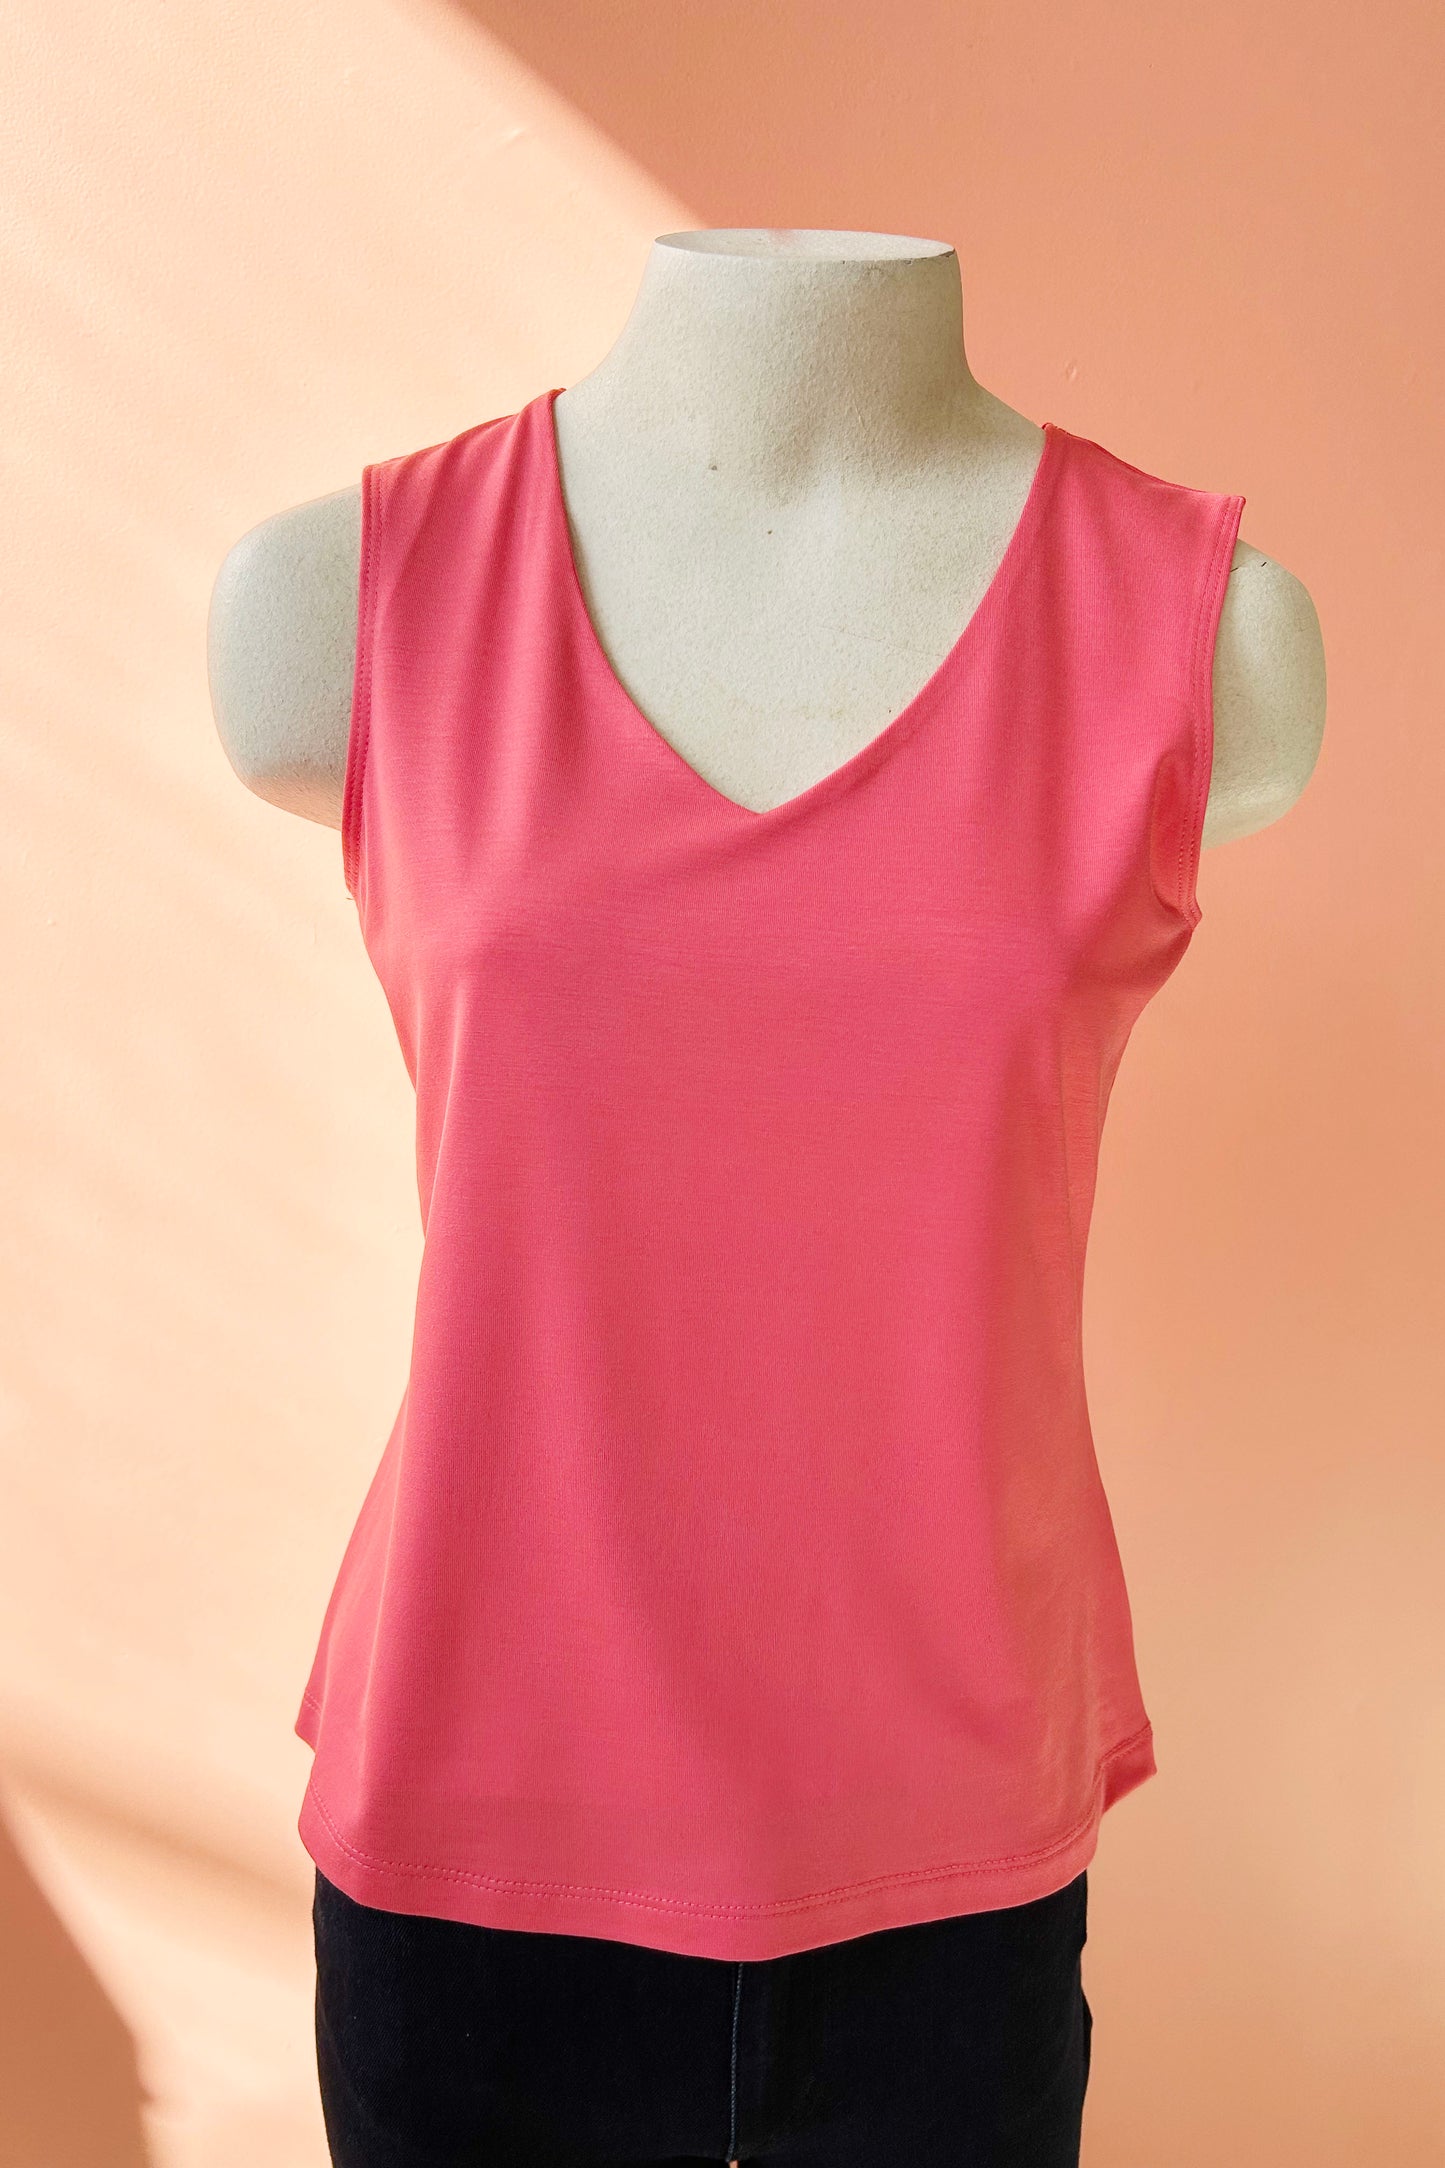 Enjoy Cami by Luc Fontaine, Pink, wide straps, V-neck, front has a double layer of fabric, slightly relaxed fit, sizes 4-16, made in Montreal 